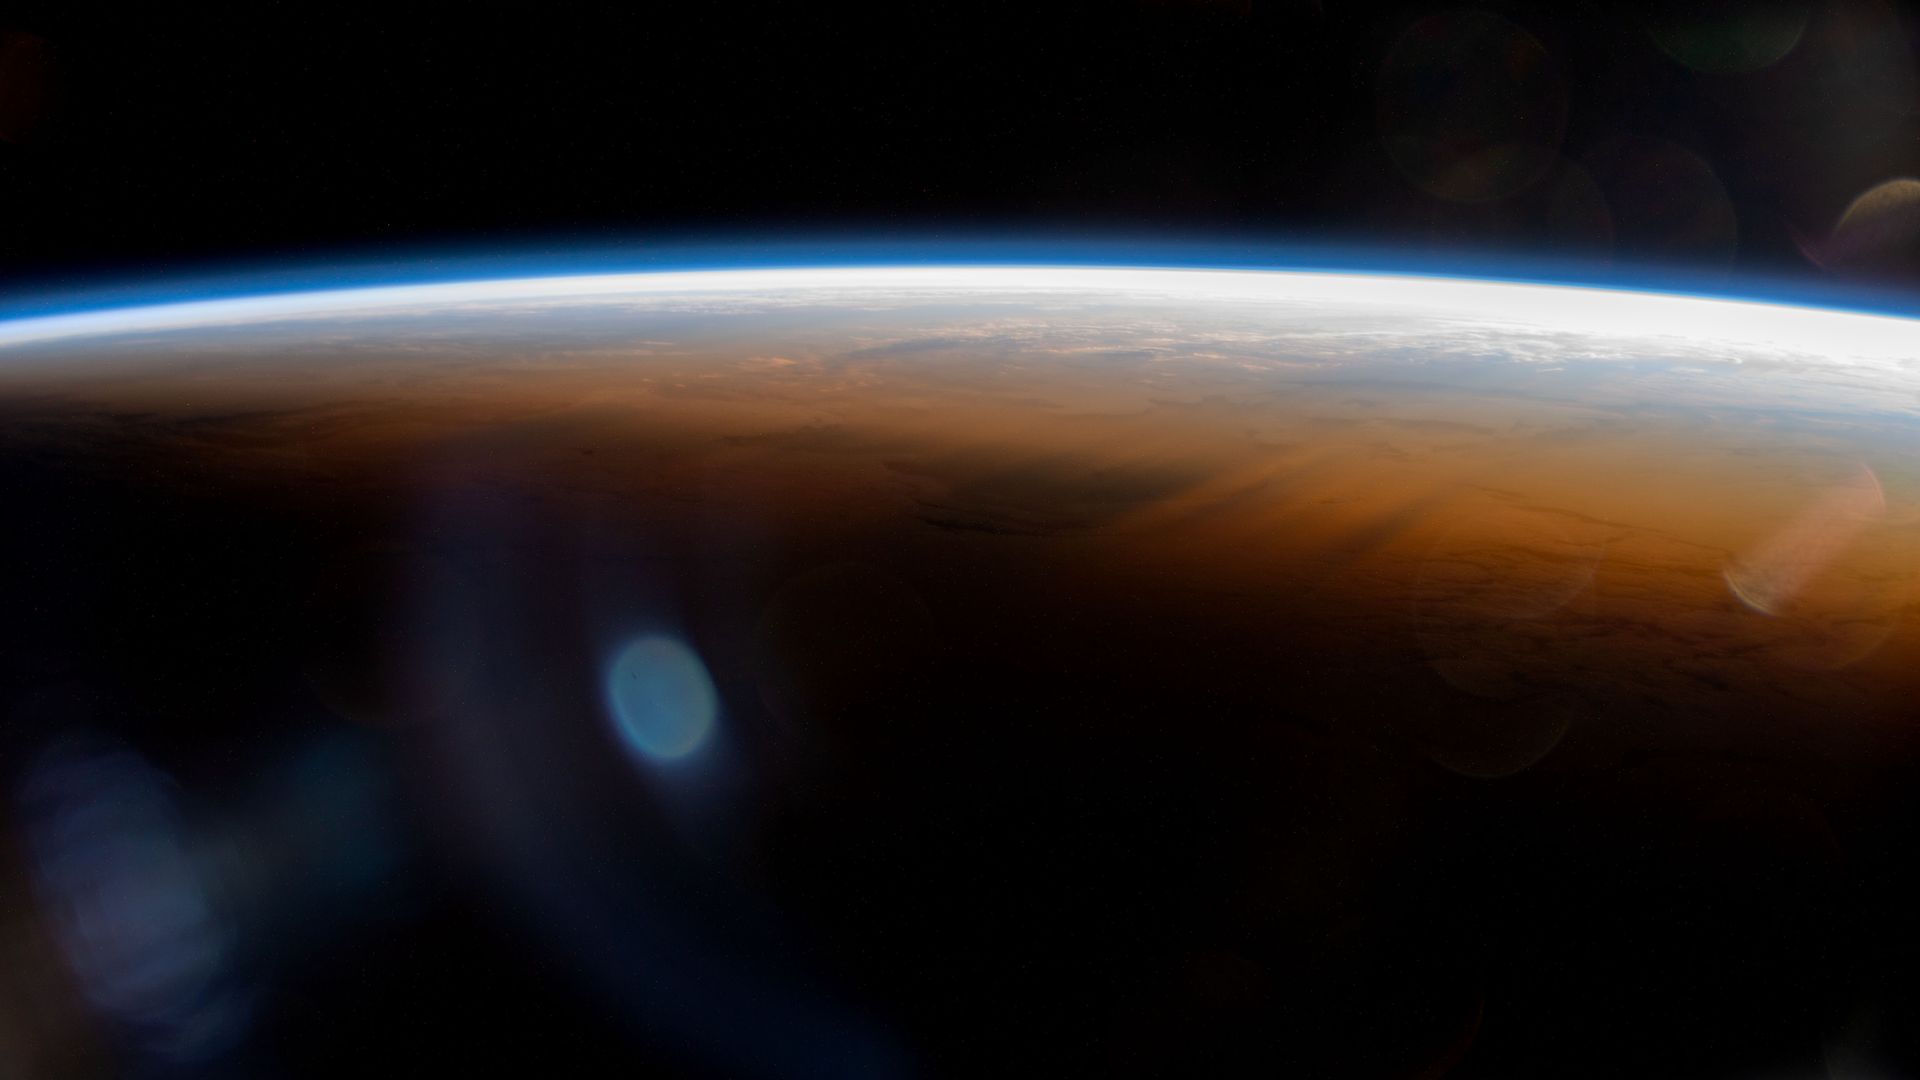 An orbital sunset seen from the International Space Station